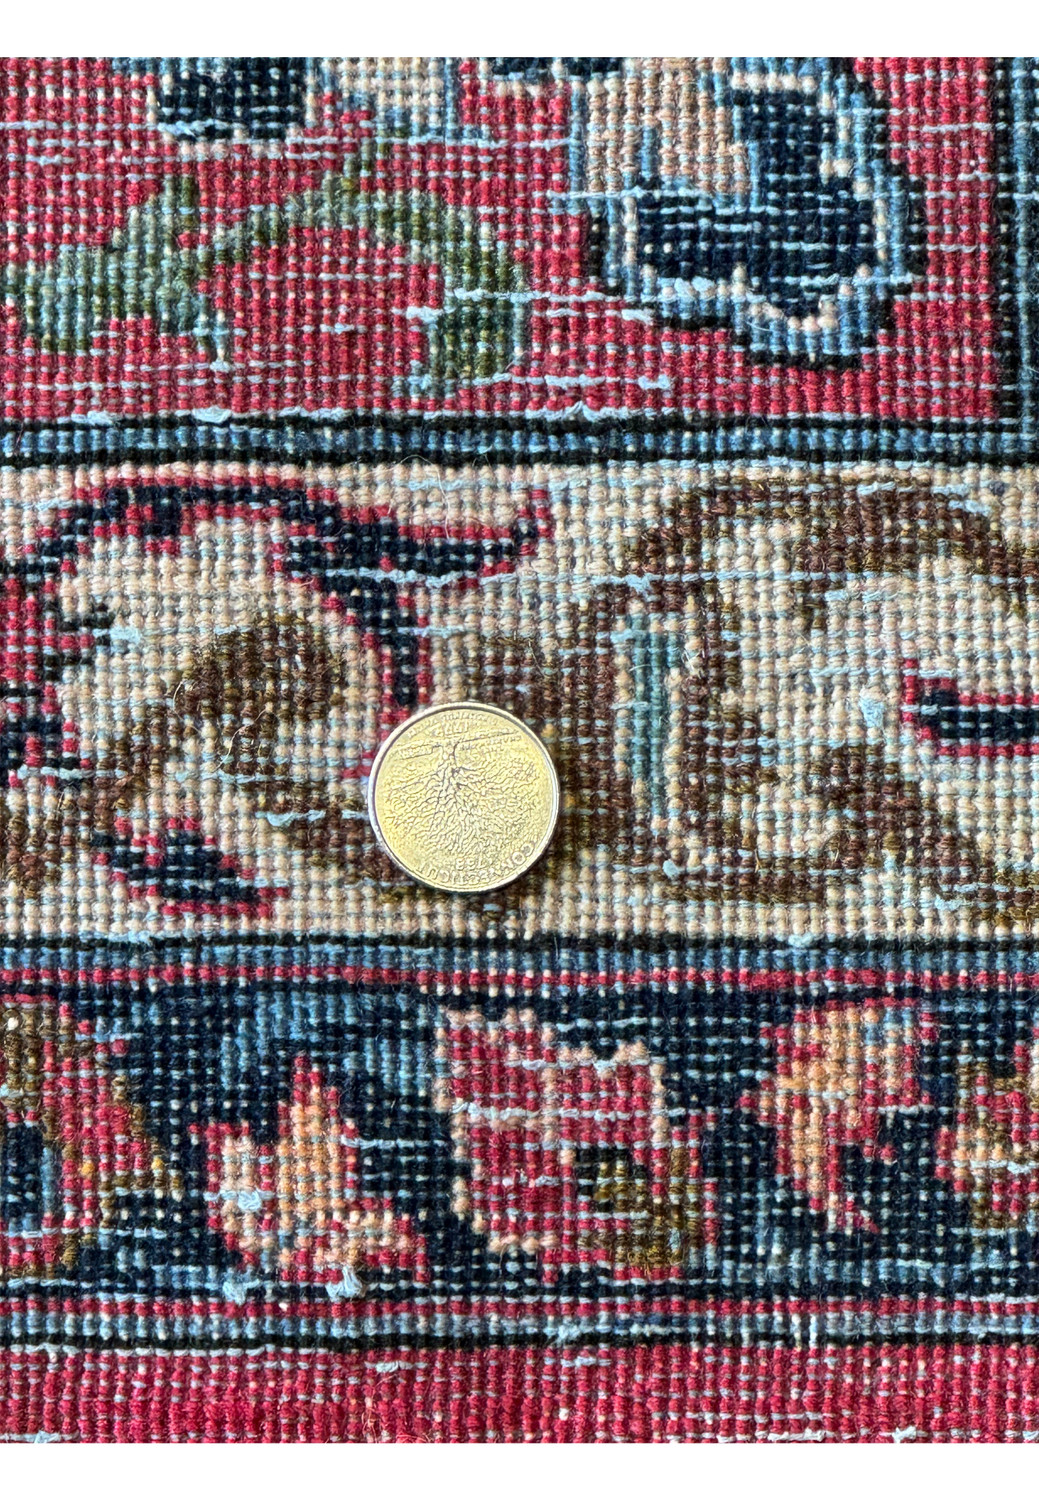 image displaying the dense weave and fine knotting of a Persian Isfahan rug's underside with a coin for scale.